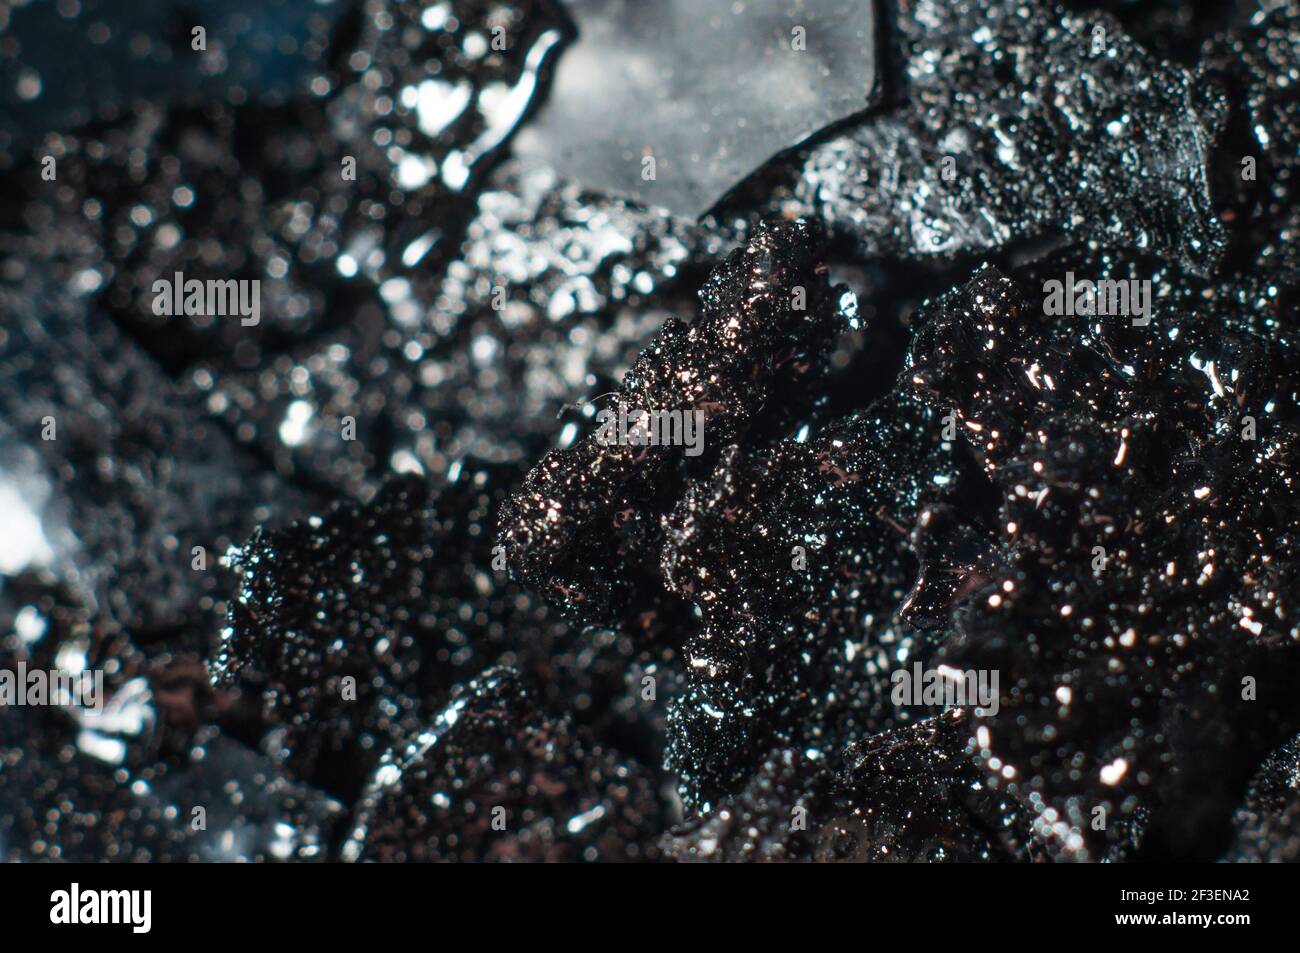 Tar and black tar deposits in the chimney close-up, macro photography Stock Photo